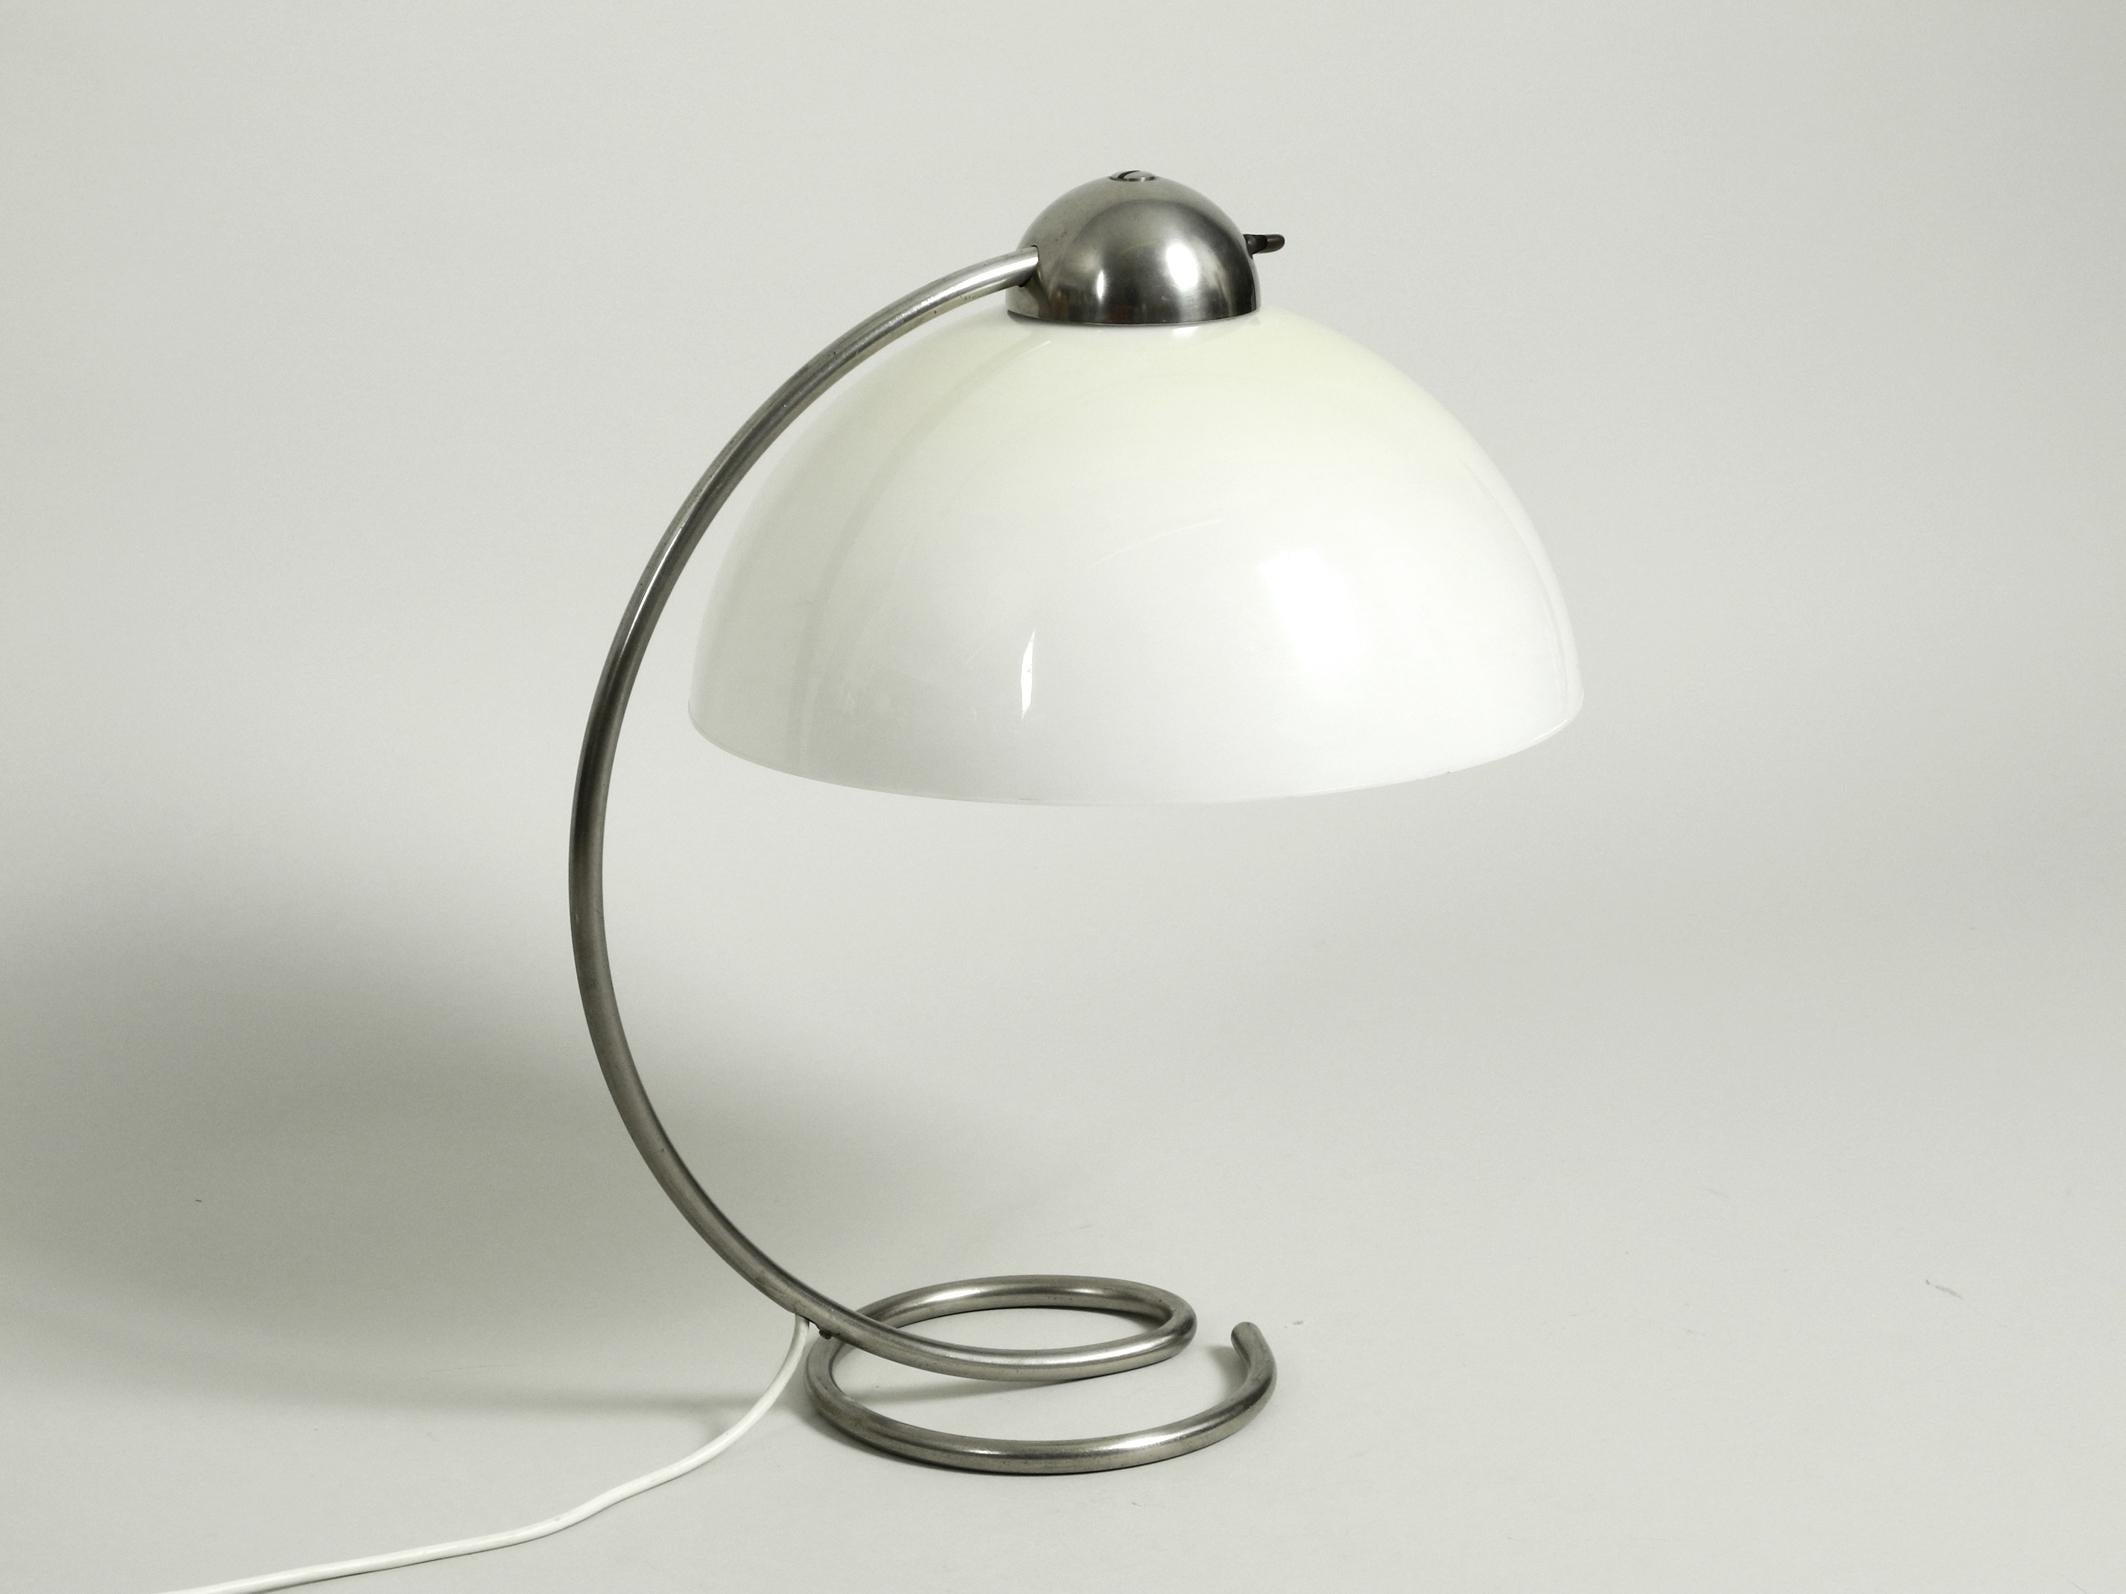 Large Midcentury Metal Table Lamp with Plastic Shade by Schanzenbach, Germany For Sale 9